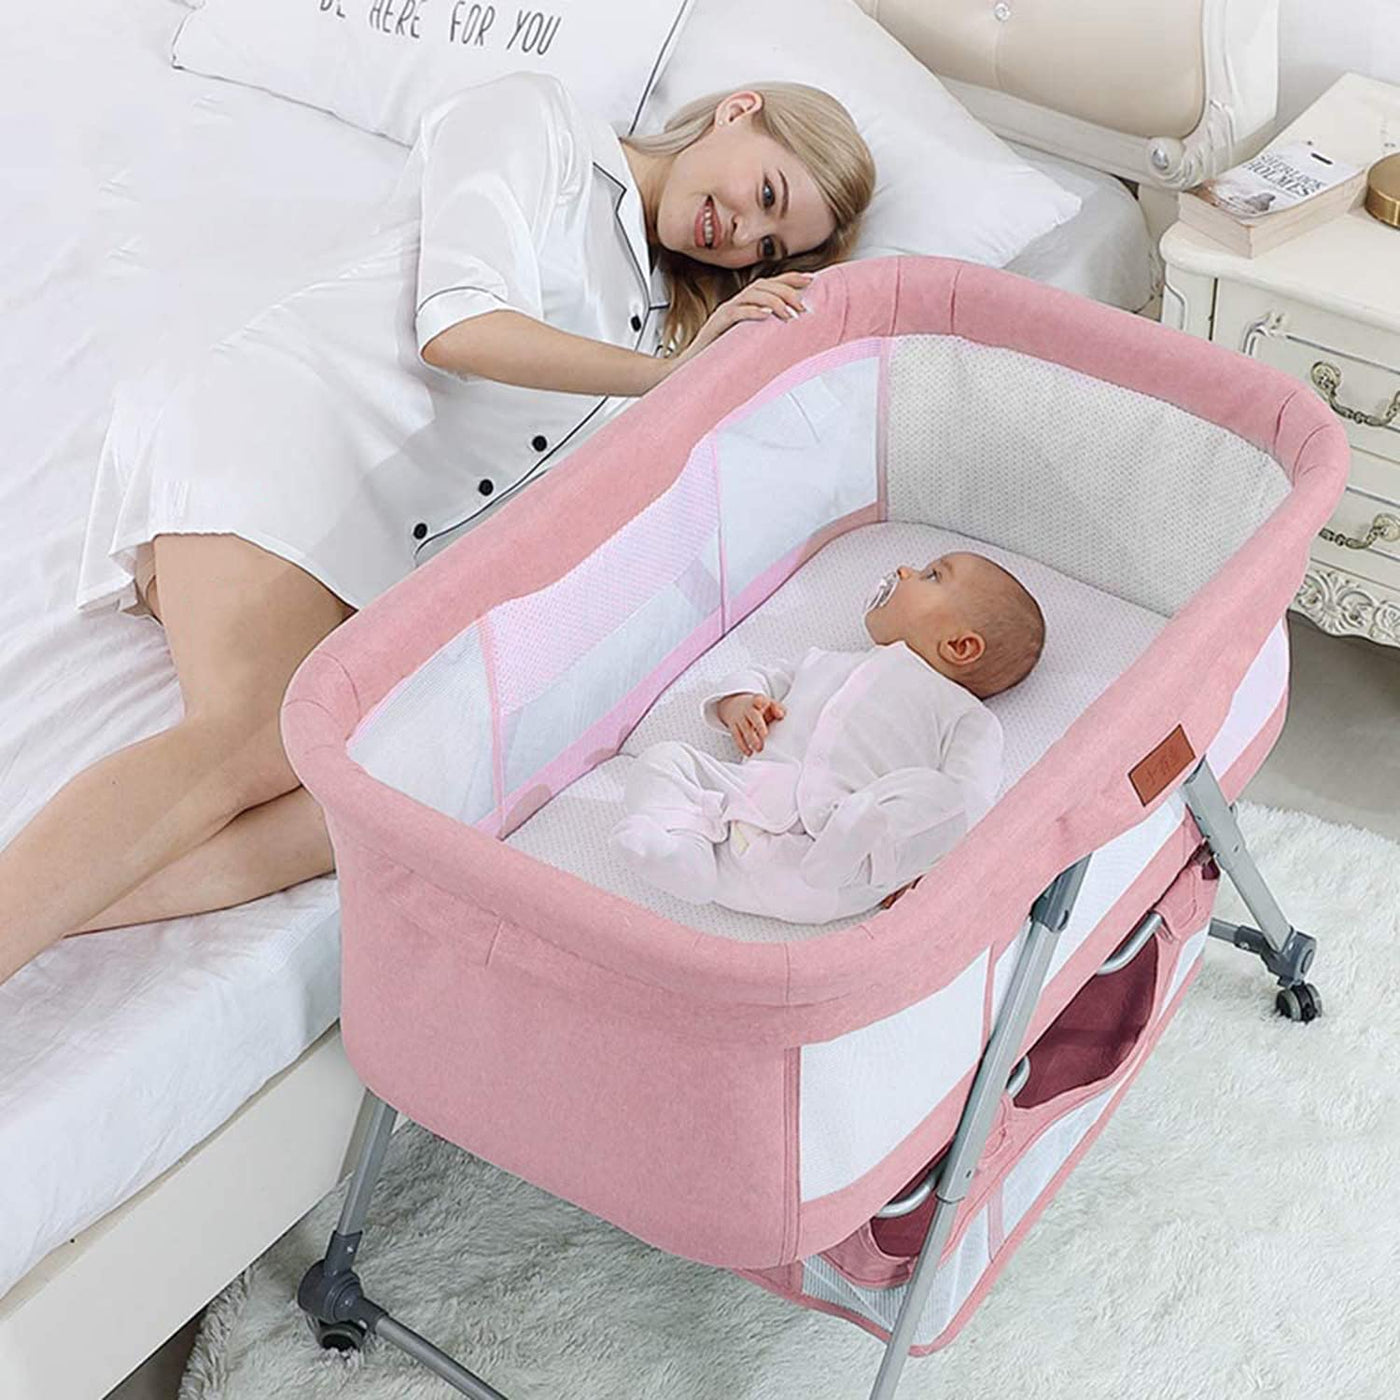 Crib Baby Rack, Foldable, Comes with Casters - Pink